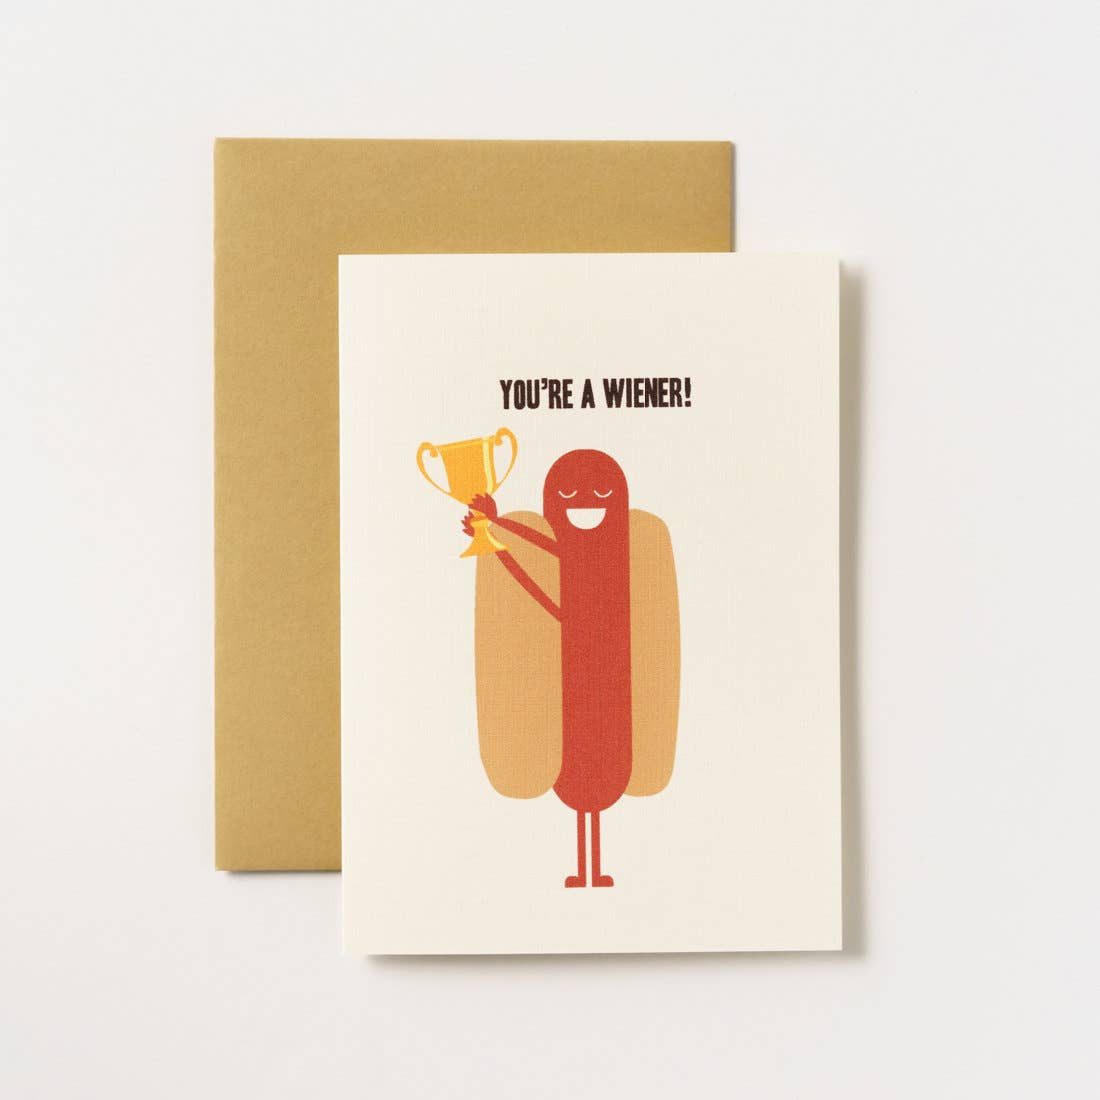 Hot Dog Greeting Card -- Hot dog is holding a trophy cup and it reads "You're A Wiener!" 